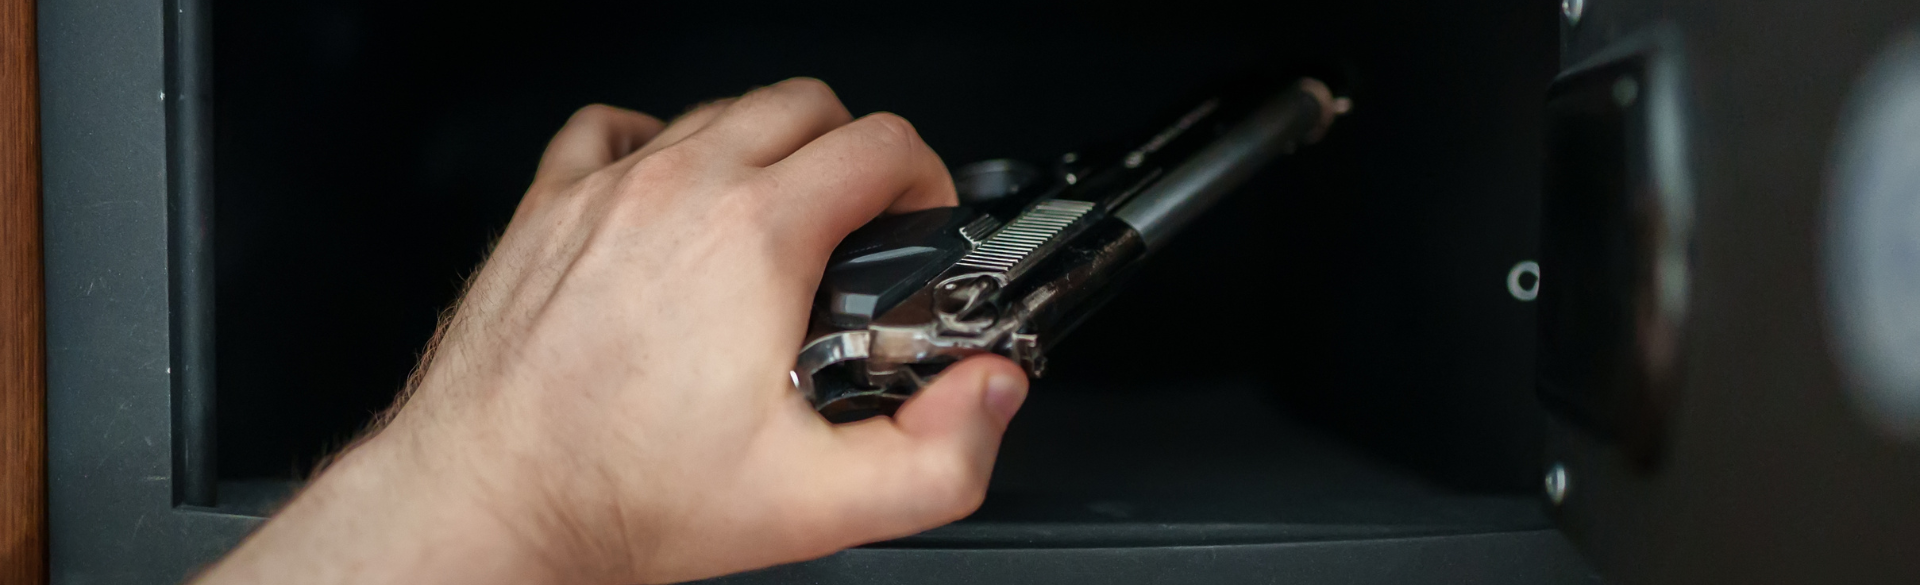 Hand holding a revolver, placing it in a lock box for storage